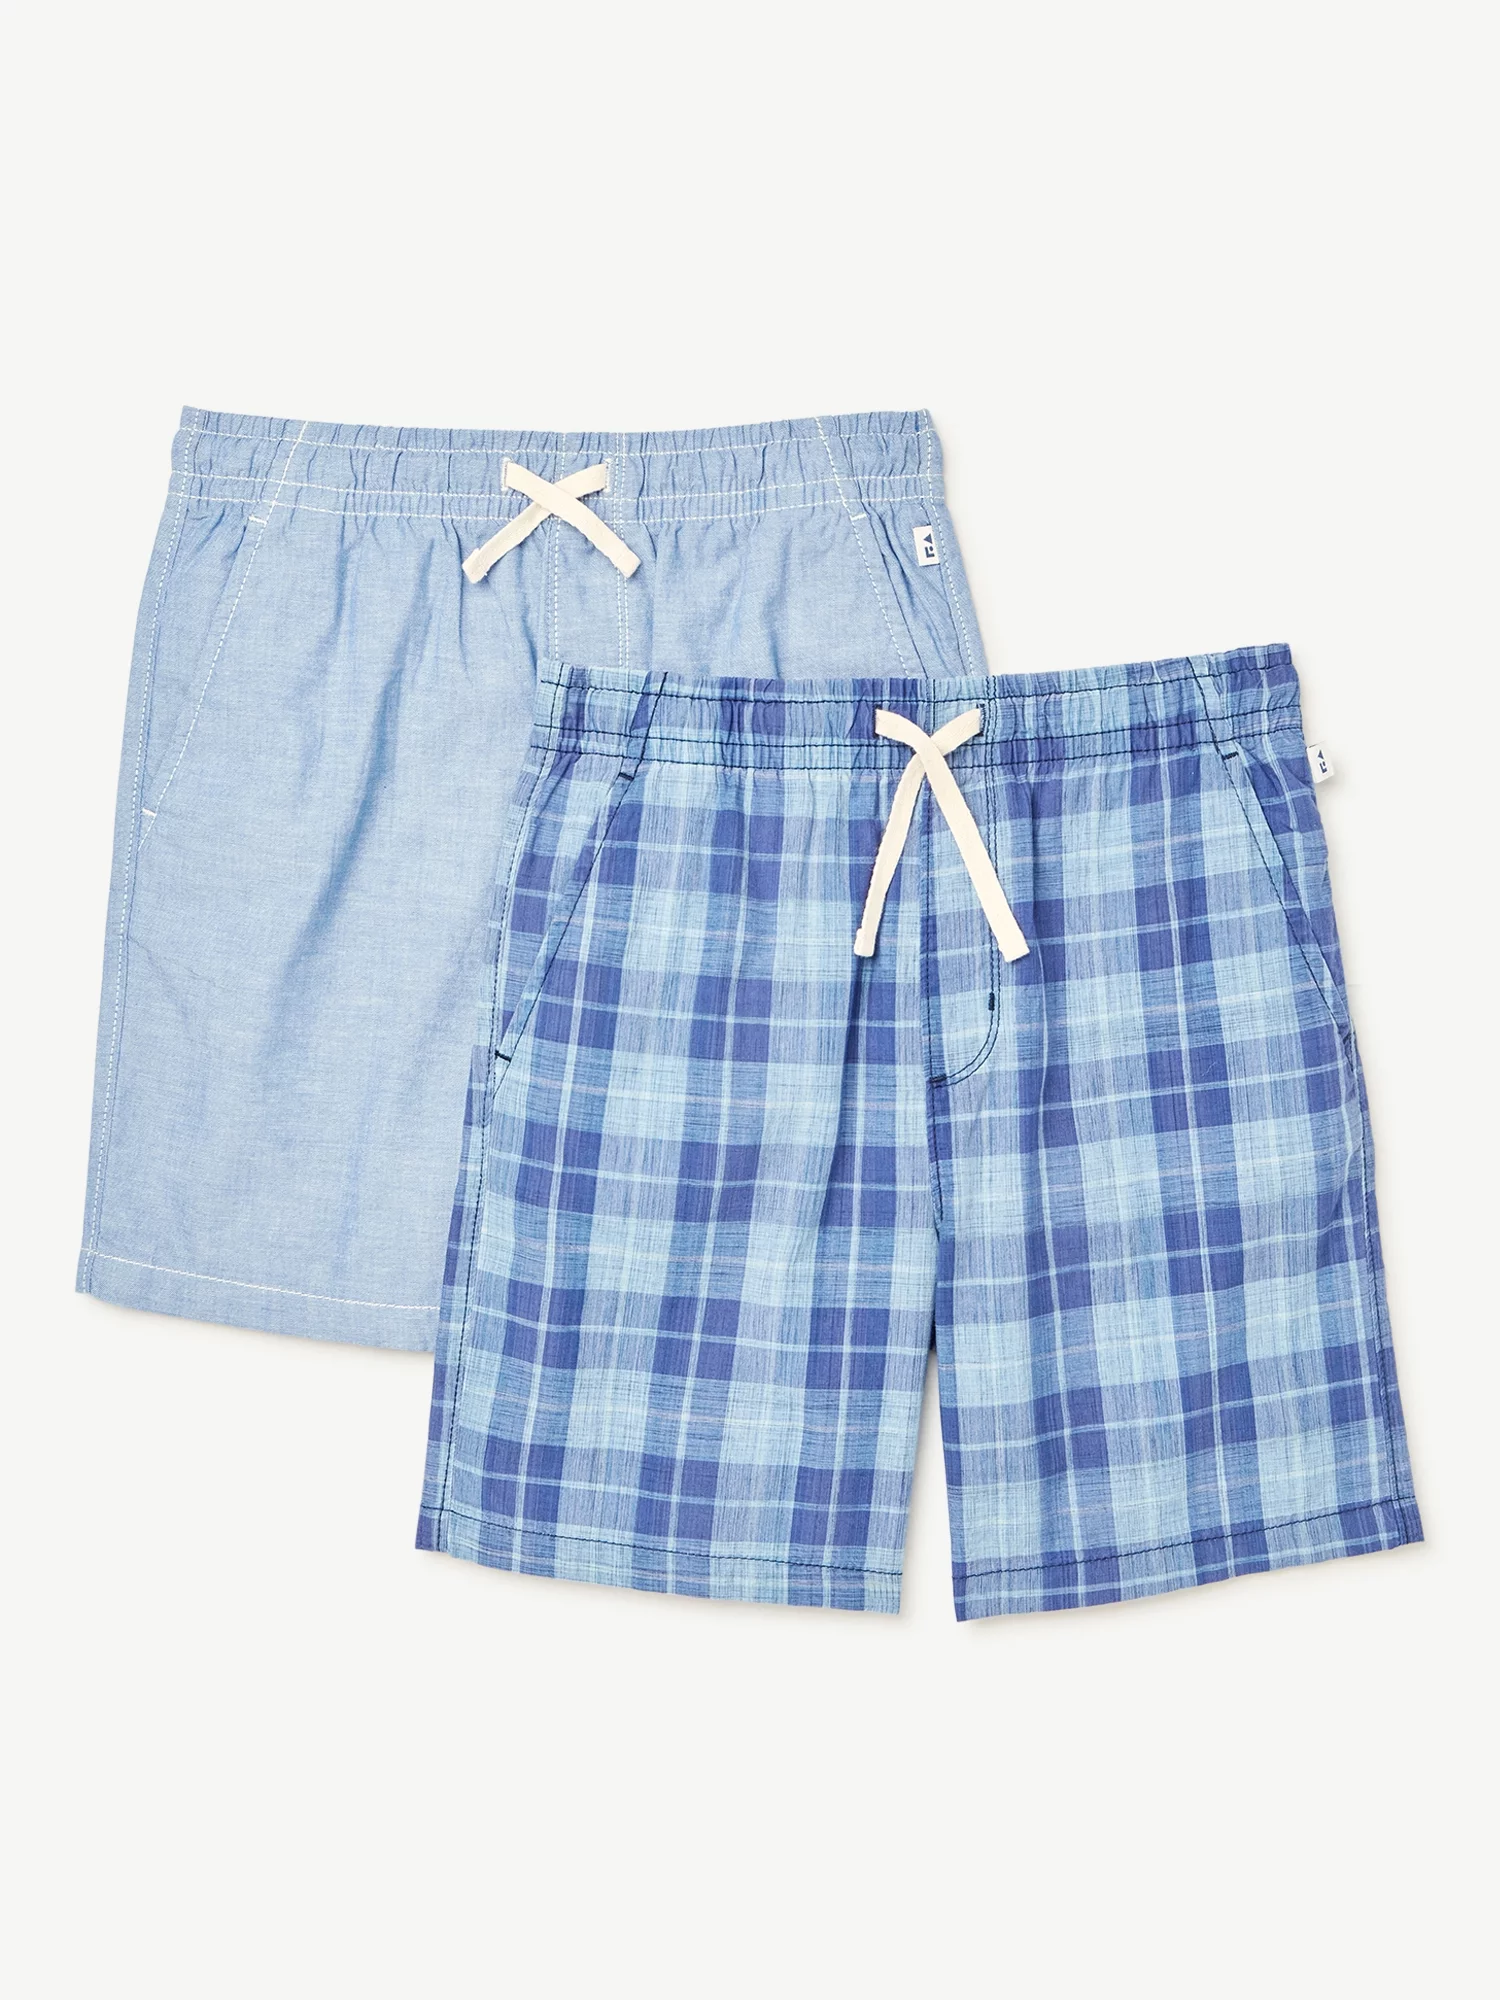 Free Assembly Boys Pull on Dock Shorts, 2-Pack, Sizes 4-18